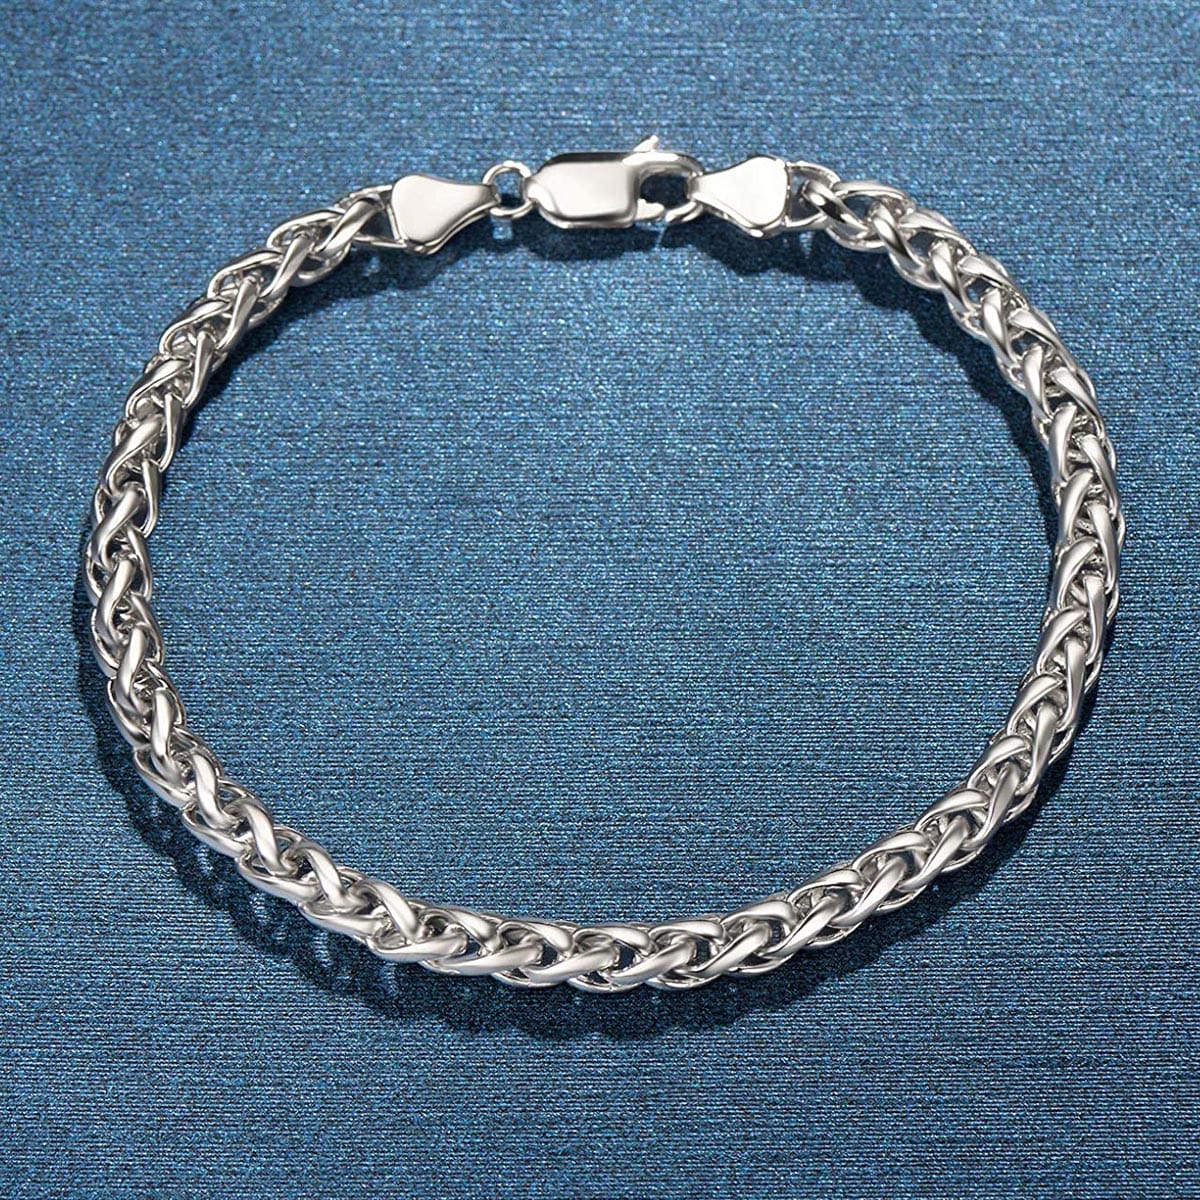 FANCIME Men's Thick Wheat Link Sterling Silver Bracelet Show